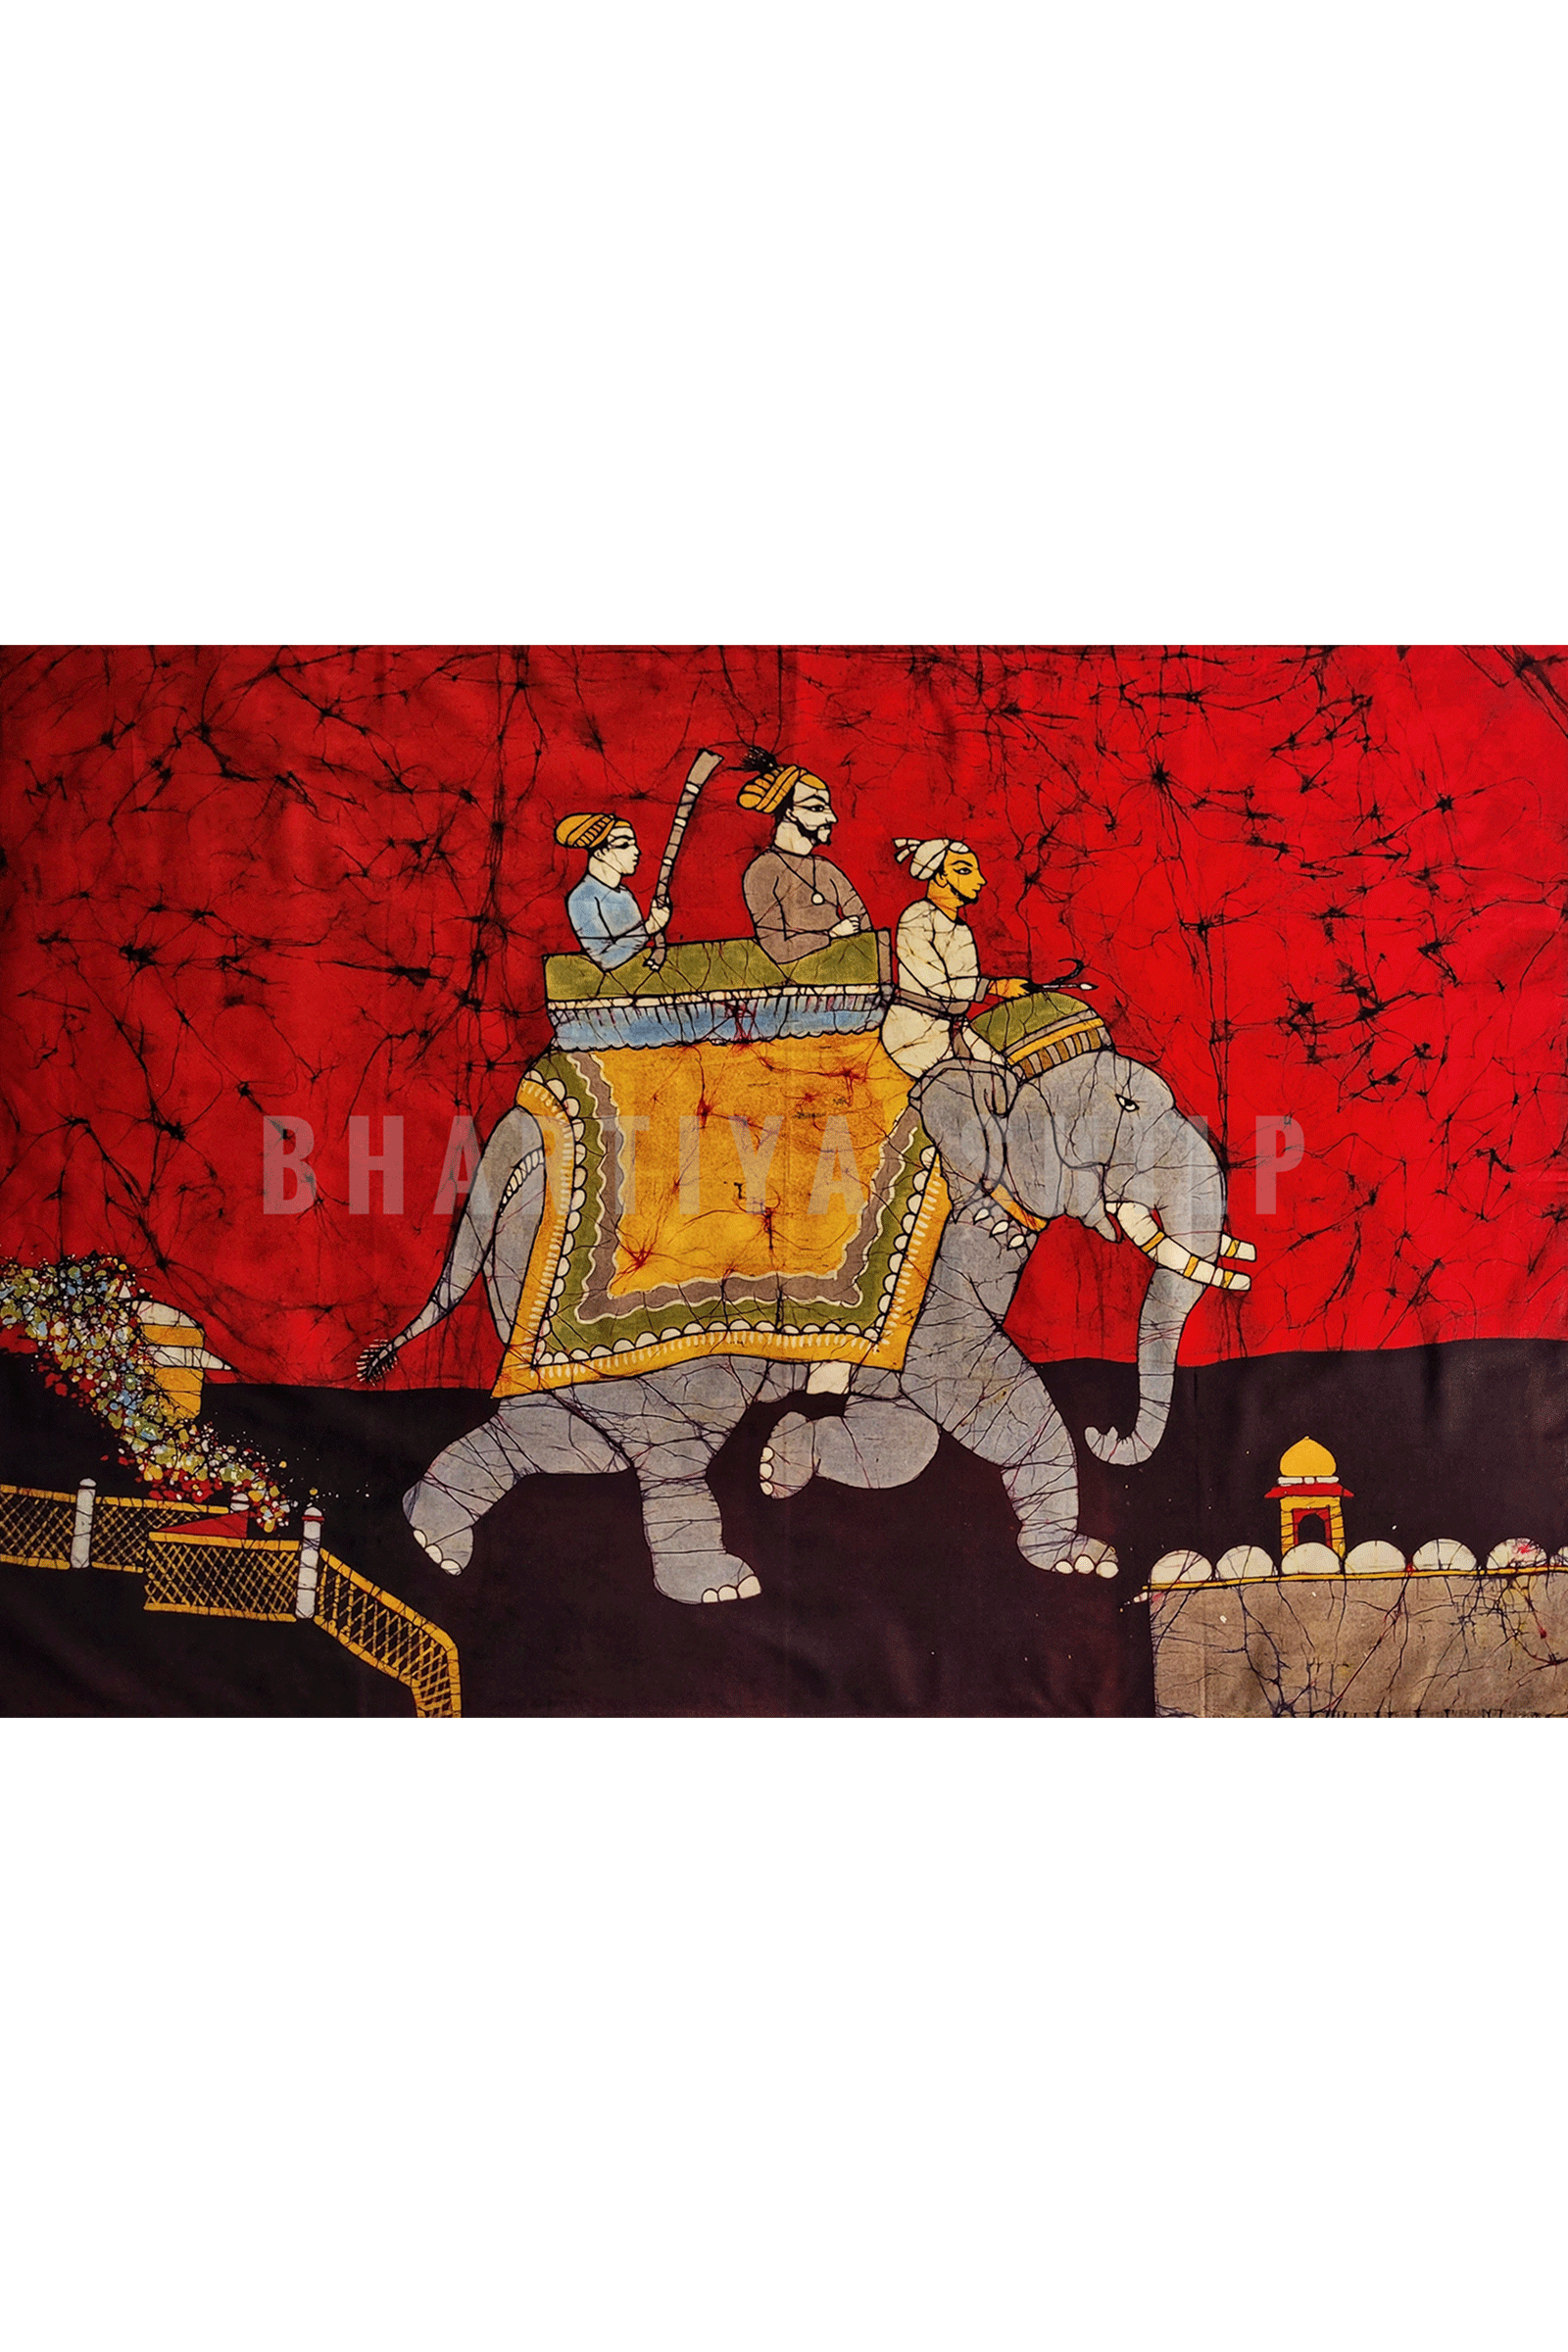 Handcrafted Warrior King Batik Painting on Cloth 35.5 inches by 24 inches SKU-BS90004 - Bhartiya Shilp